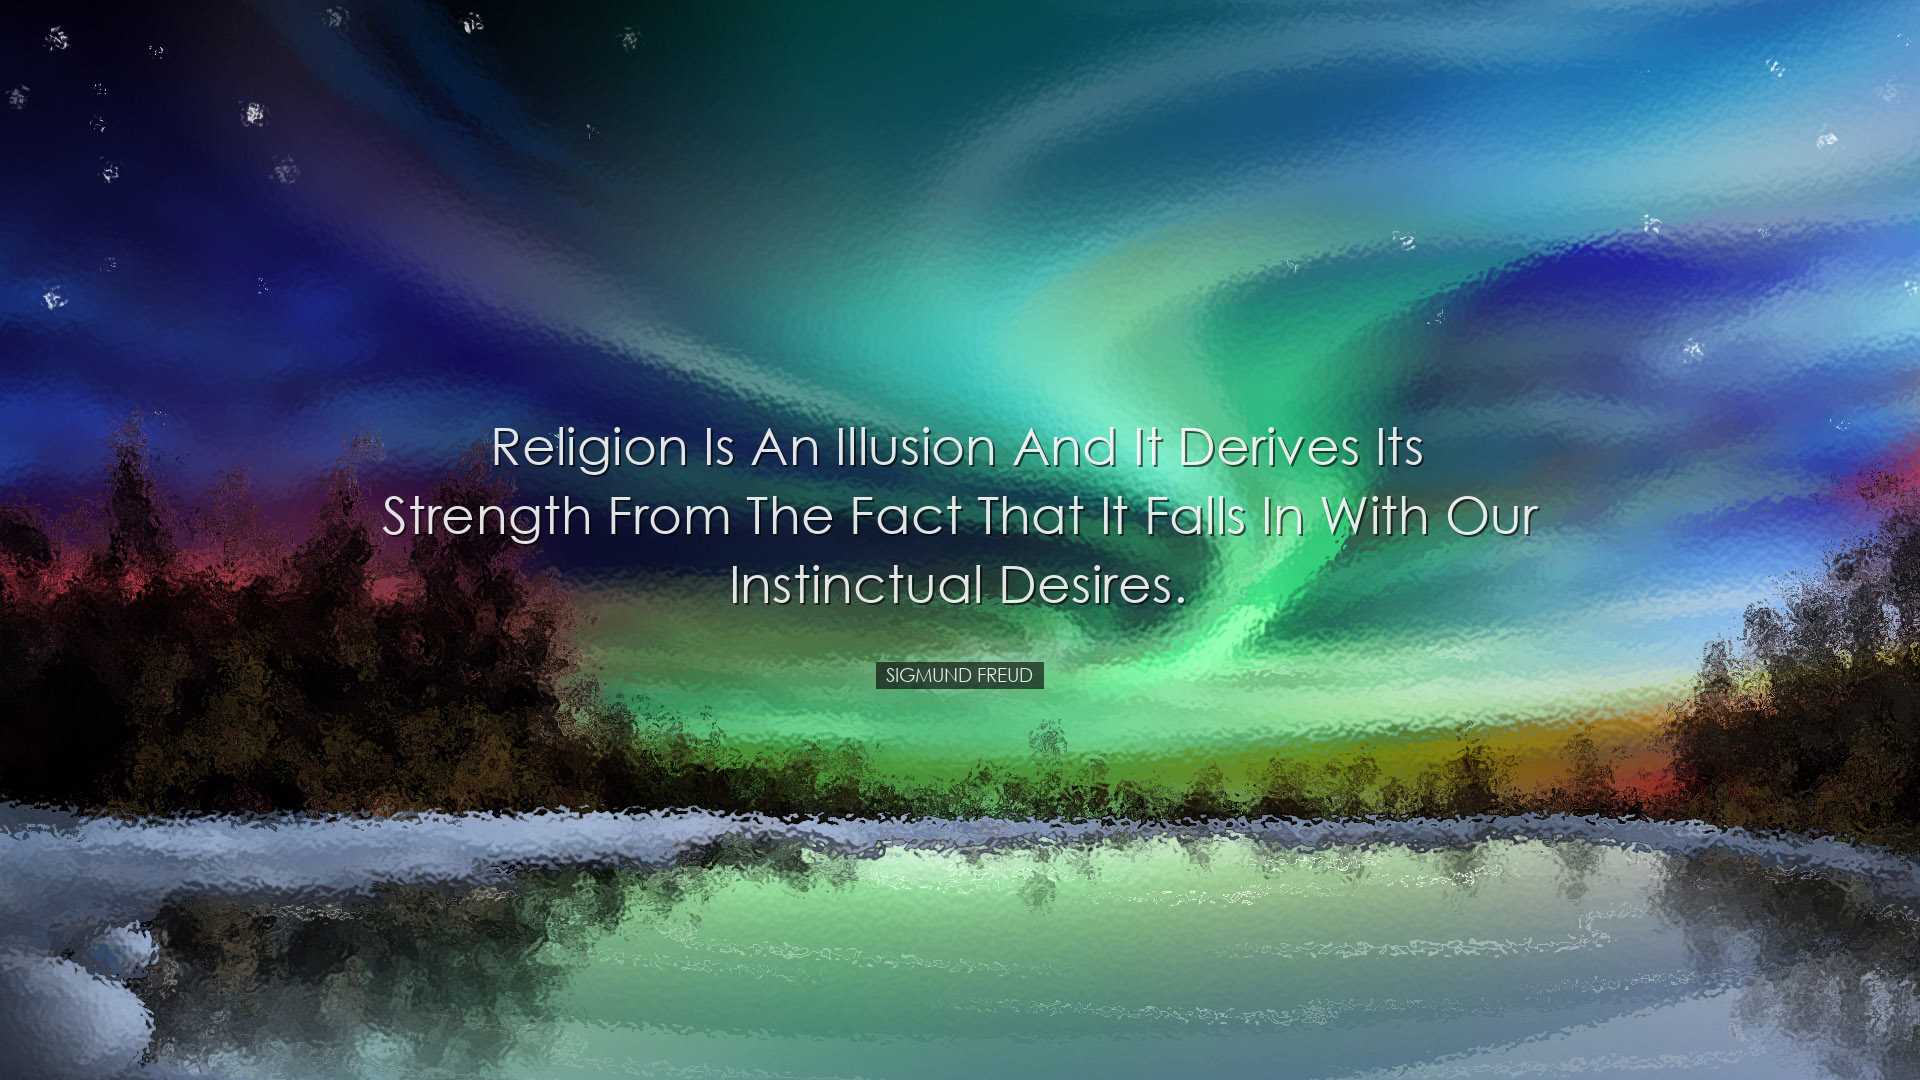 Religion is an illusion and it derives its strength from the fact